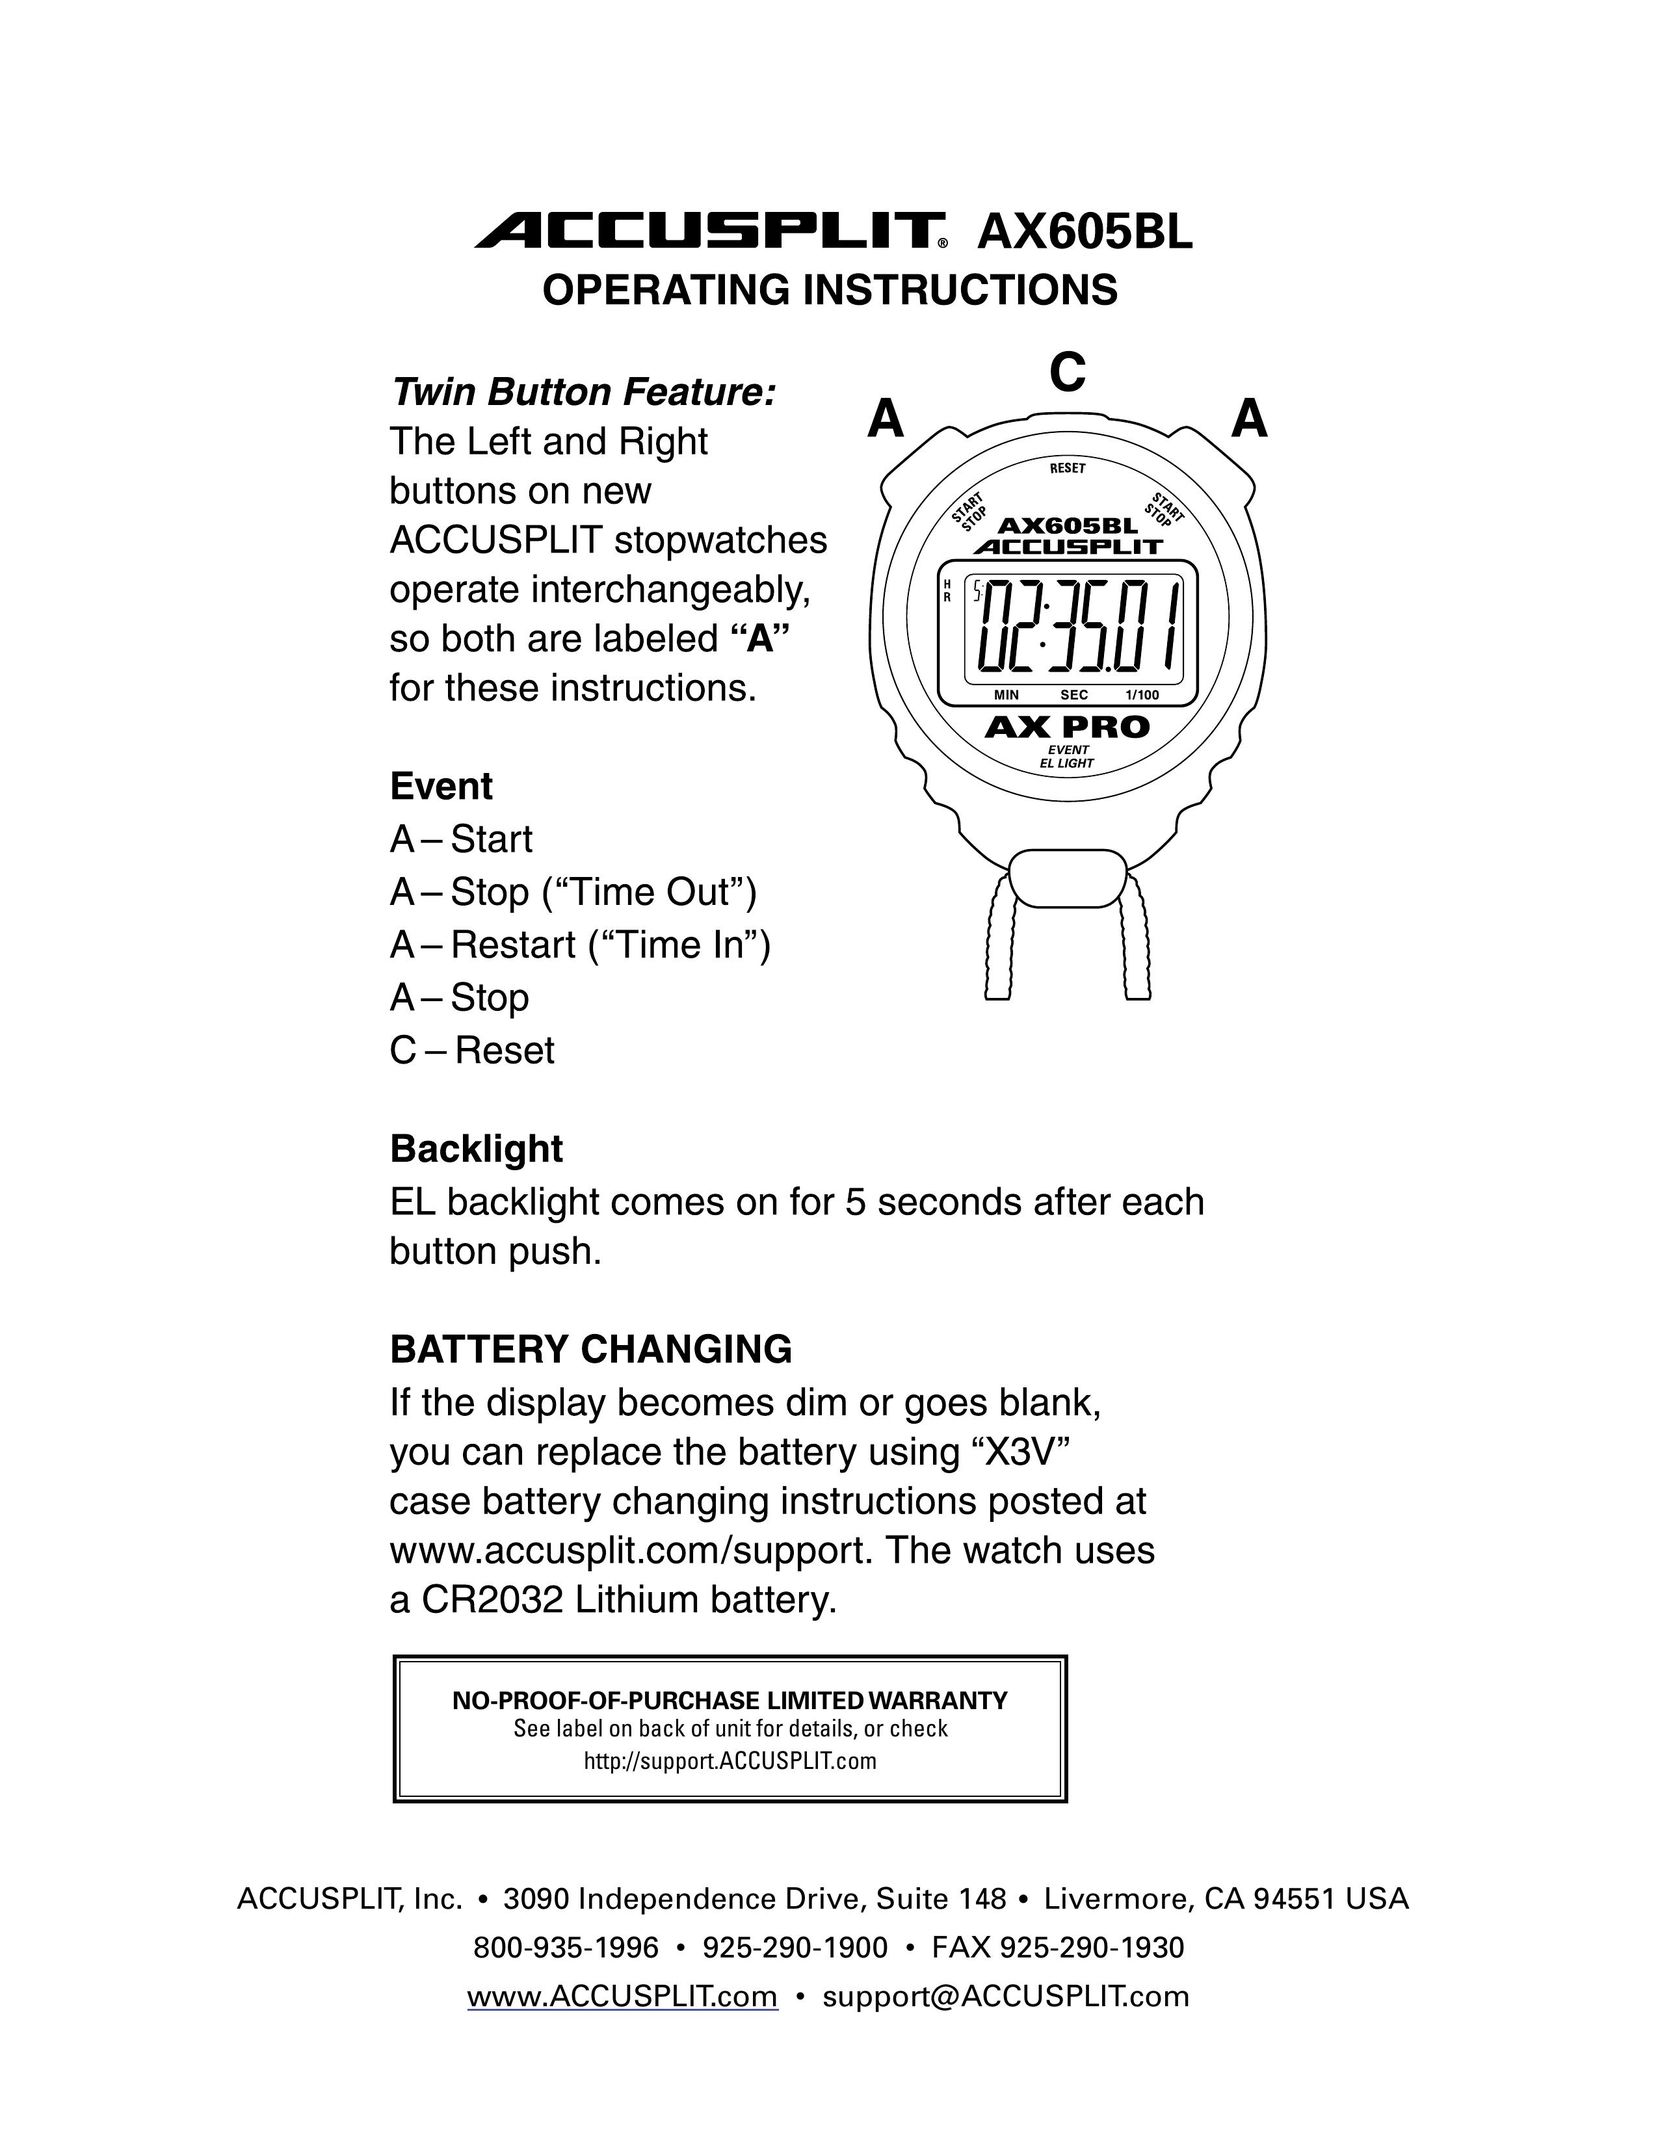 Accusplit AX605BL Heart Rate Monitor User Manual